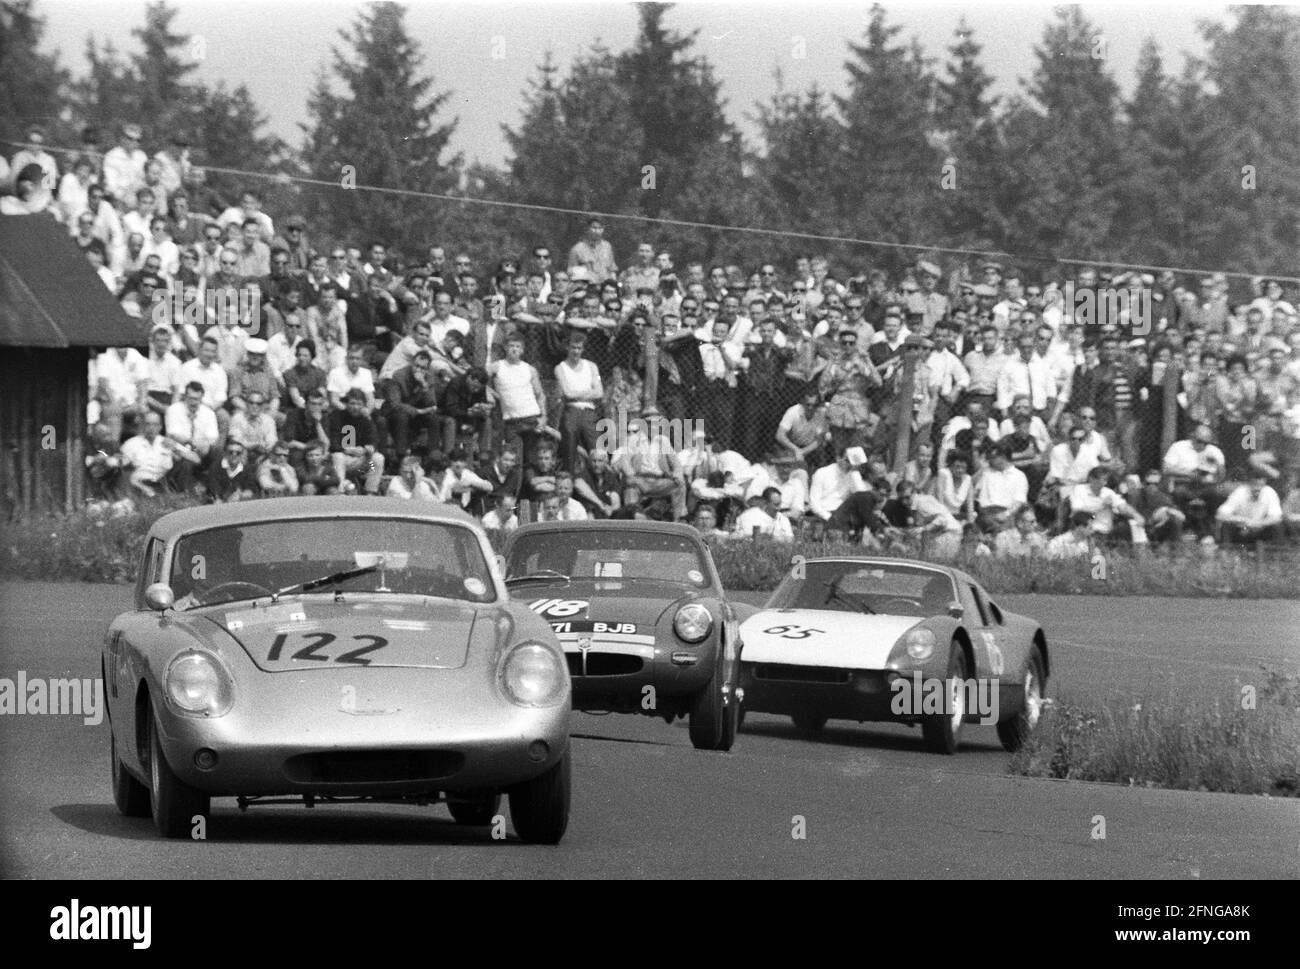 1000km race on the Nürburgring 31.05.1964. In front an Austin Healey Sebring Sprite (No. 122) , MG Midget (No. 118) and a Porsche 904 GTS (No. 65). In the background many spectators , separated only by a fence. [automated translation] Stock Photo